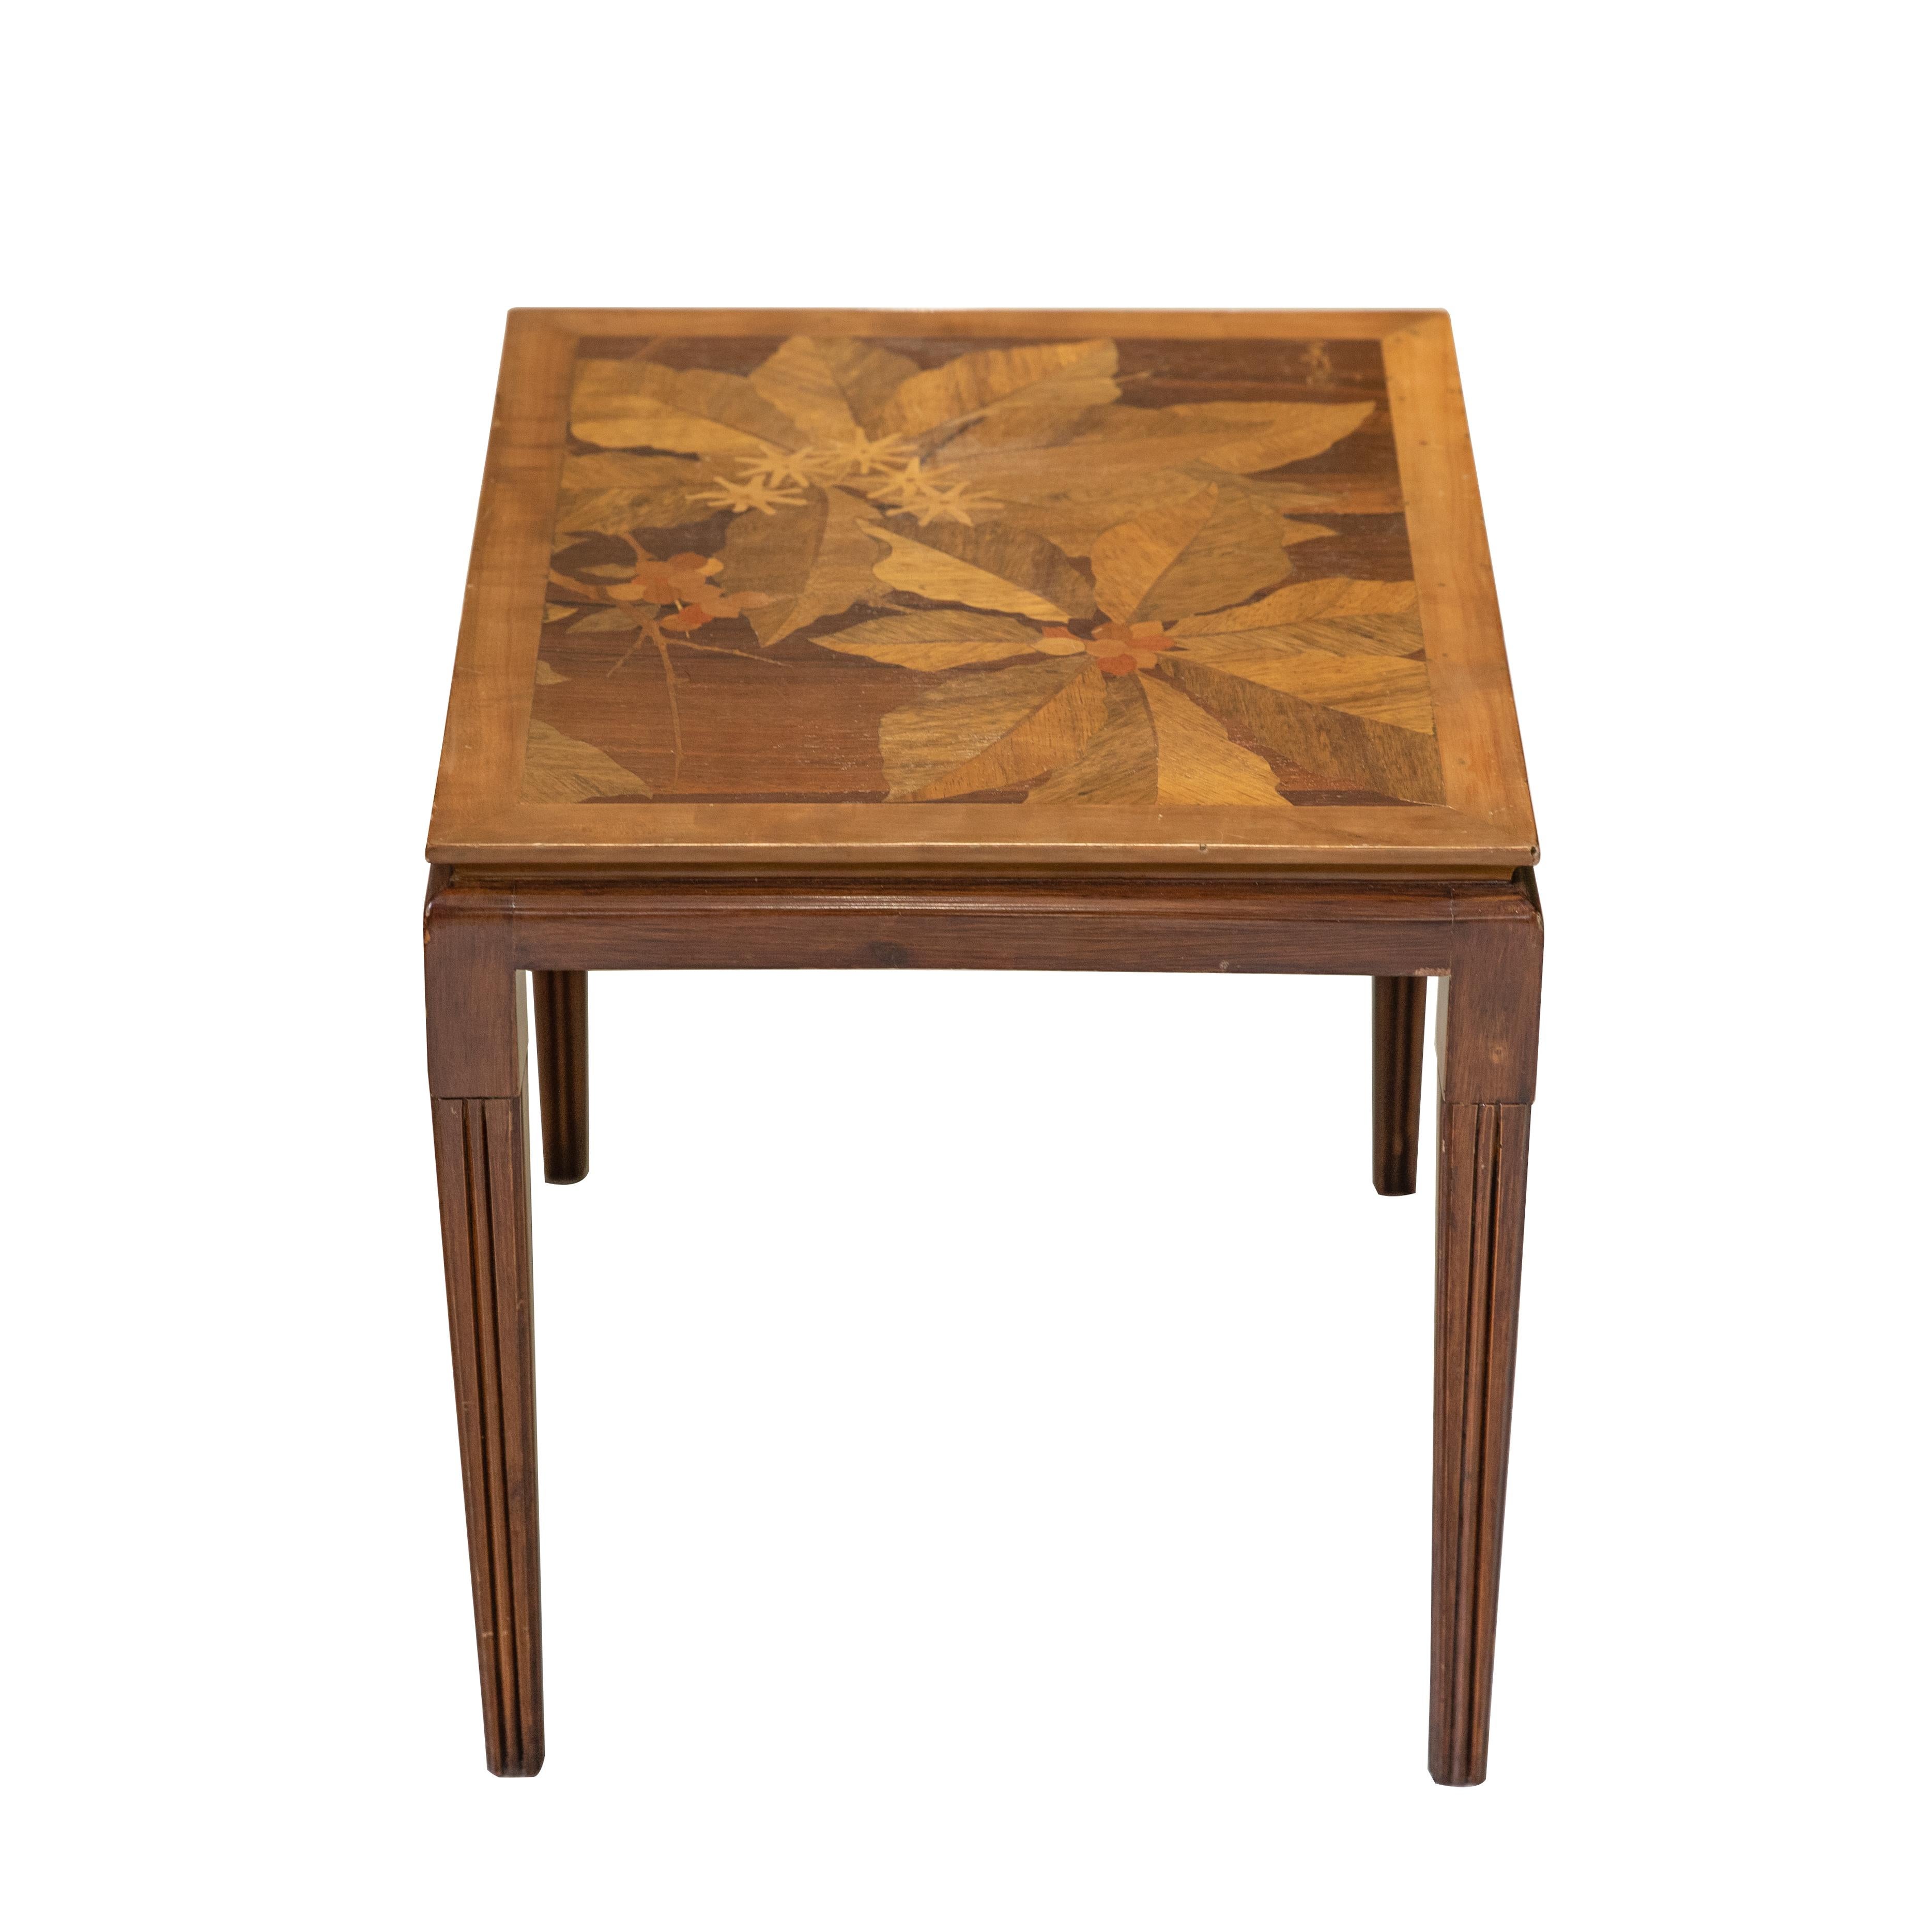 Emile Gallé inlaid early 20th century art nouveau side table with floral and foliage motifs. French designer Emile Gallé is considered to be one of the driving forces behind the Art Nouveau movement. His artwork lives on in almost every museum